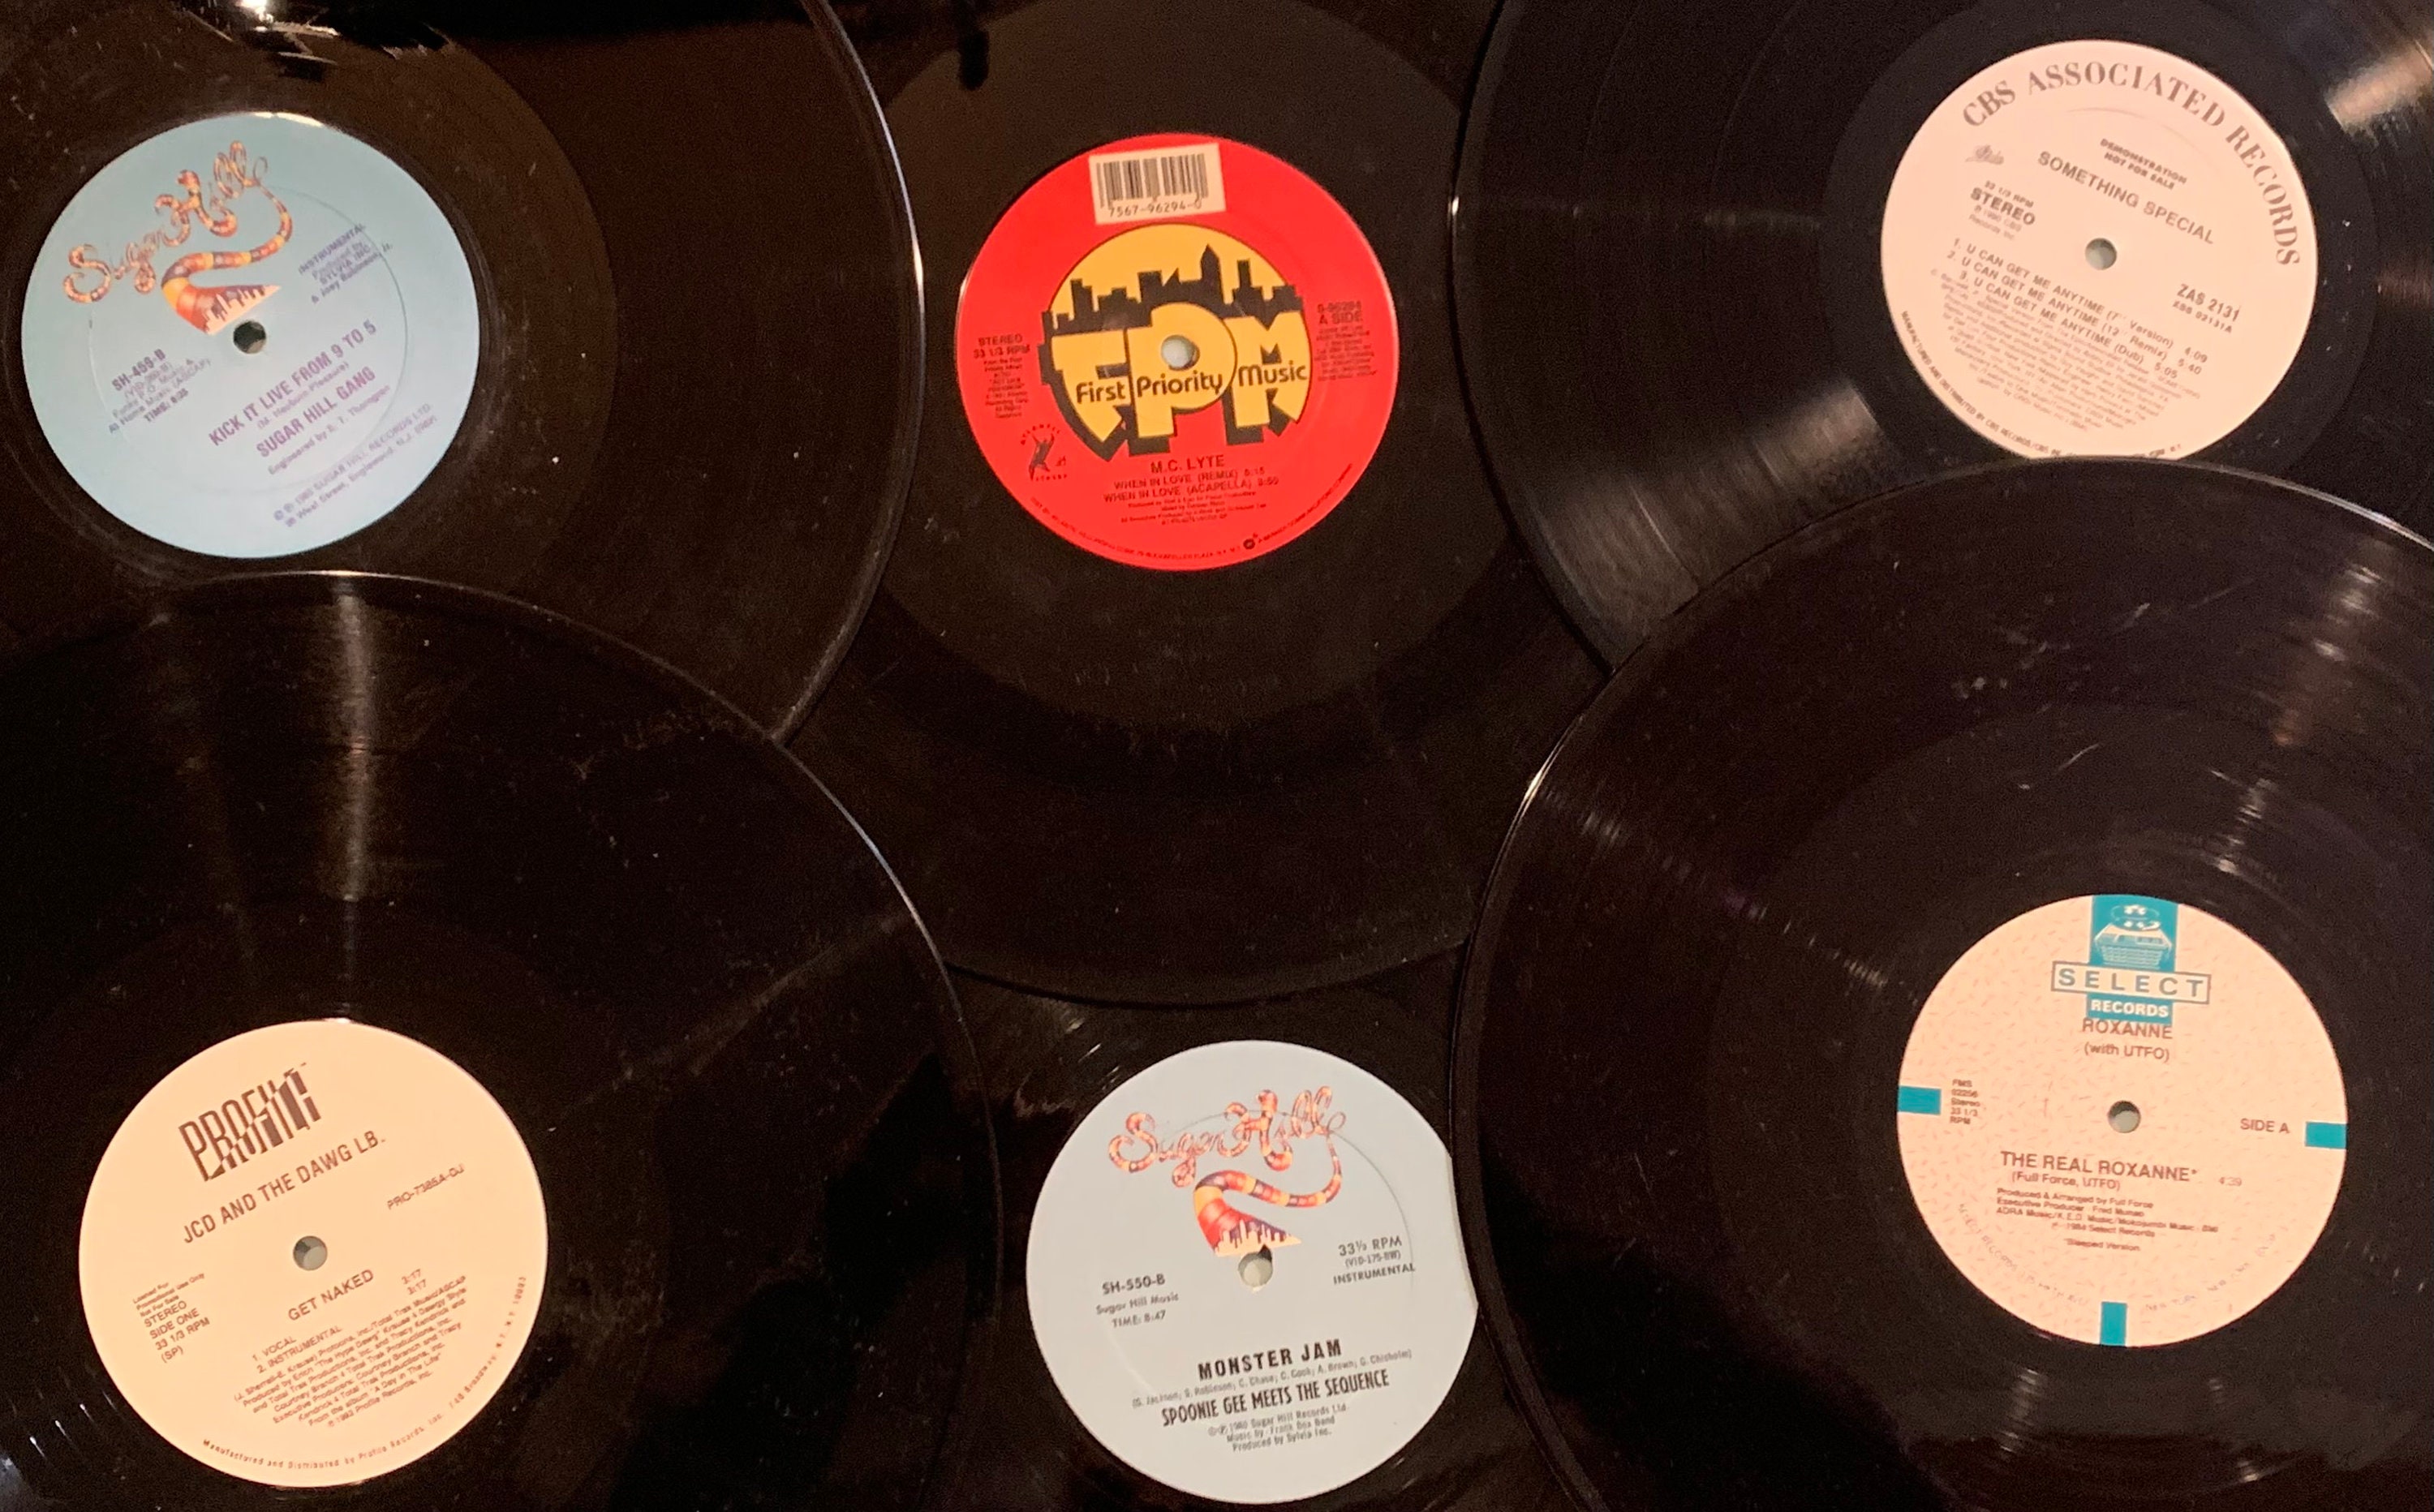 Vinyl Records for Crafting, Wall Decor, Invitations, Wedding Guest